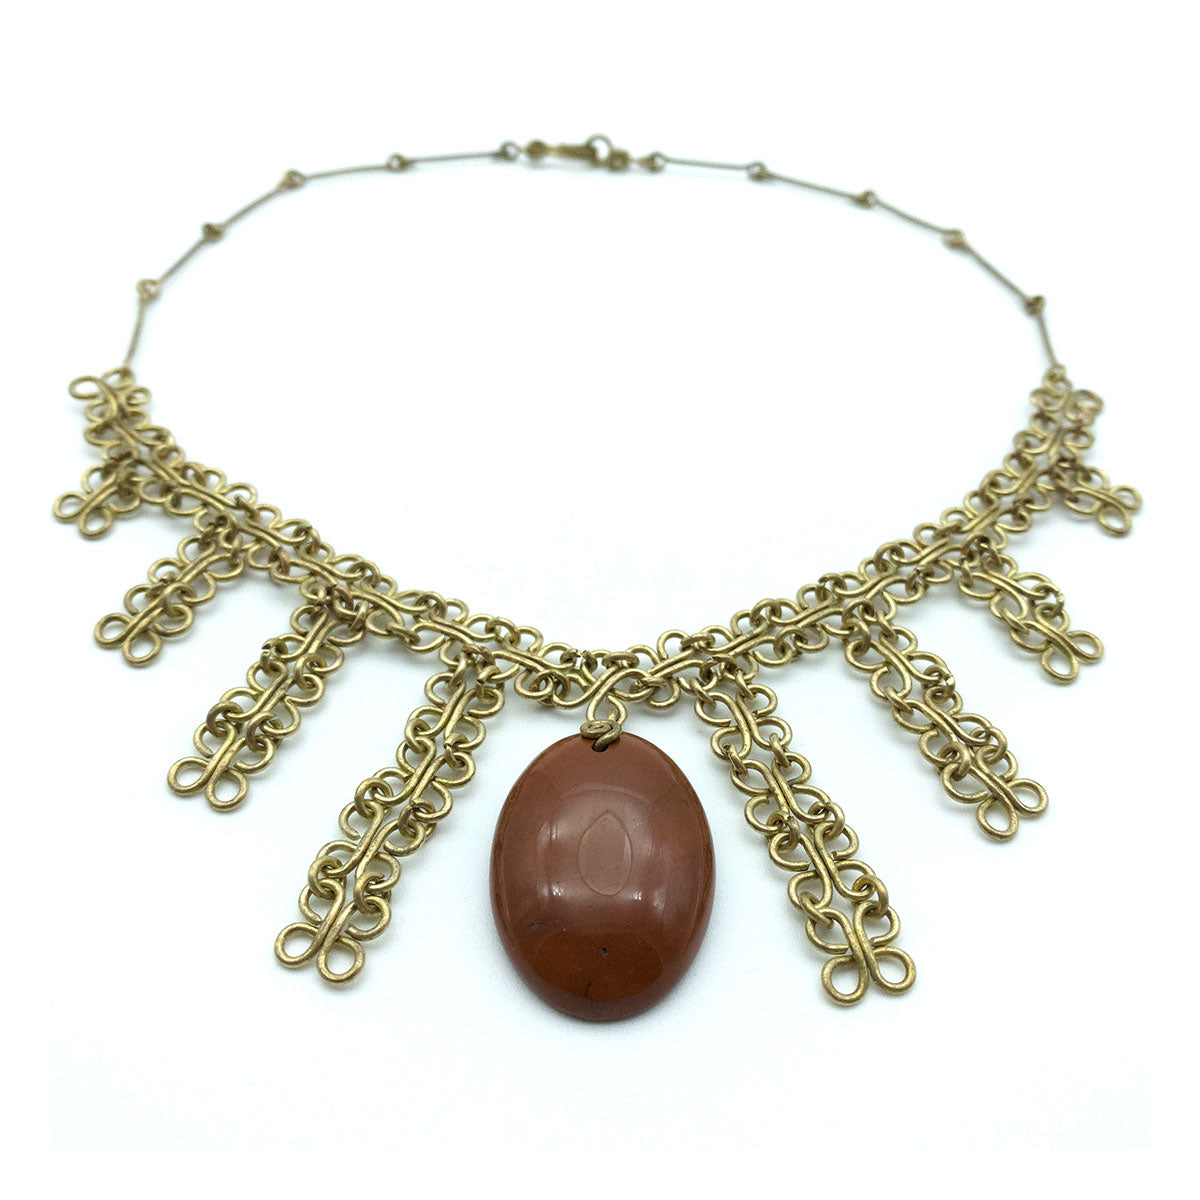 Athens necklace